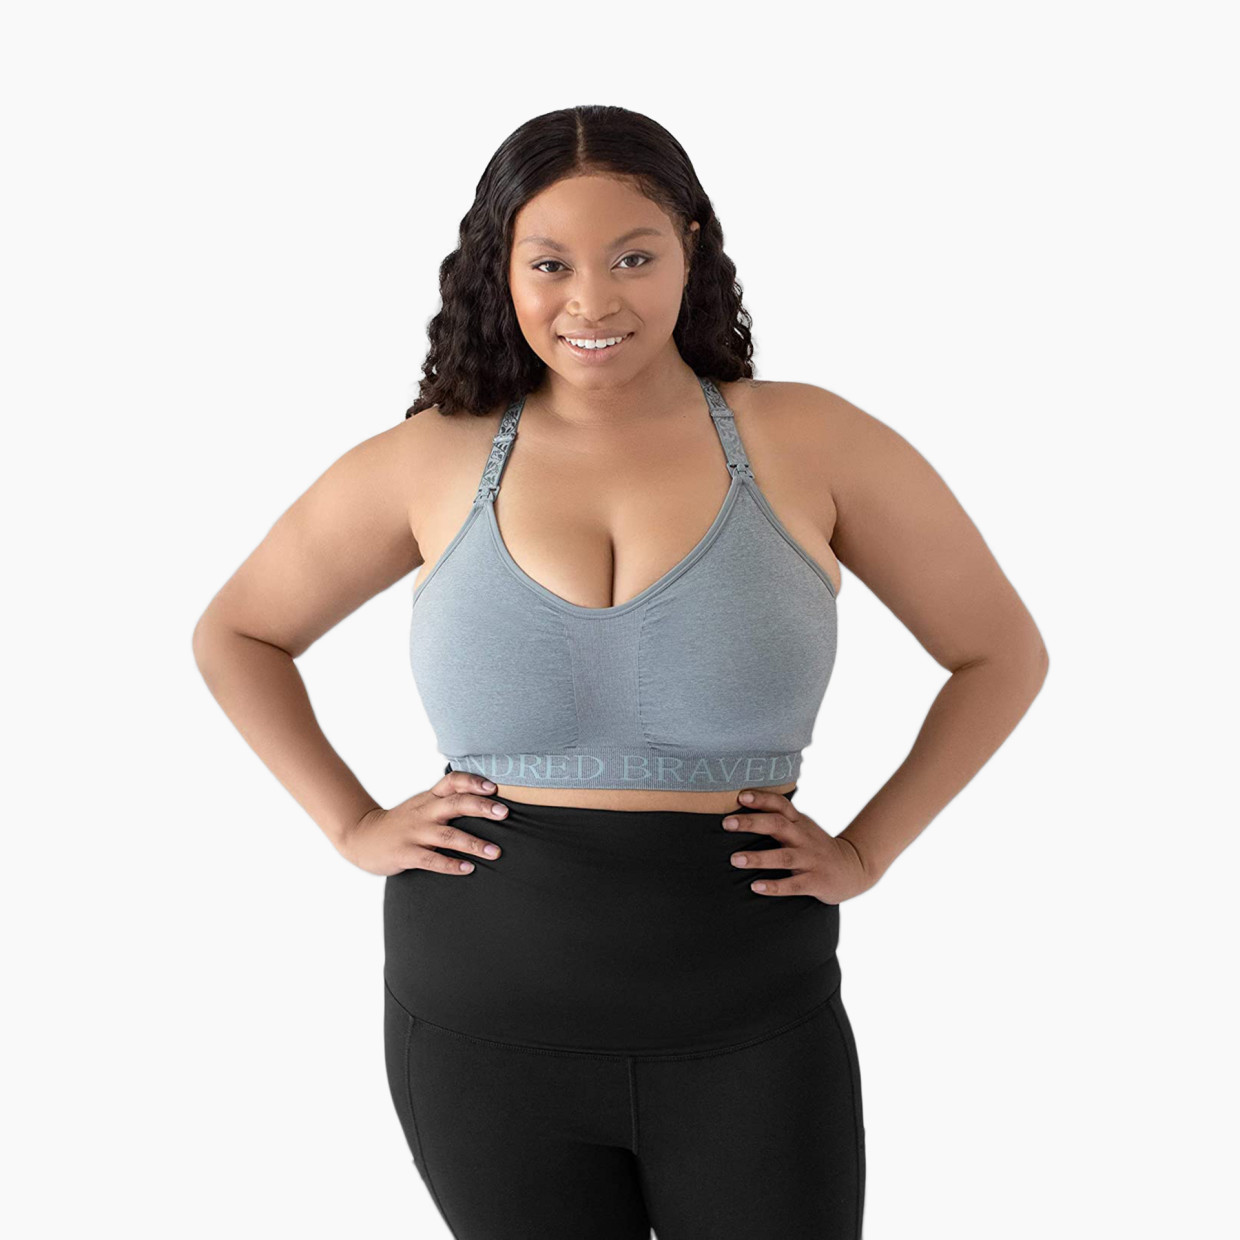 Kindred Bravely Sublime Support Low Impact Nursing & Maternity Sports Bra - Seaglass Heather, Xx-Large-Busty.